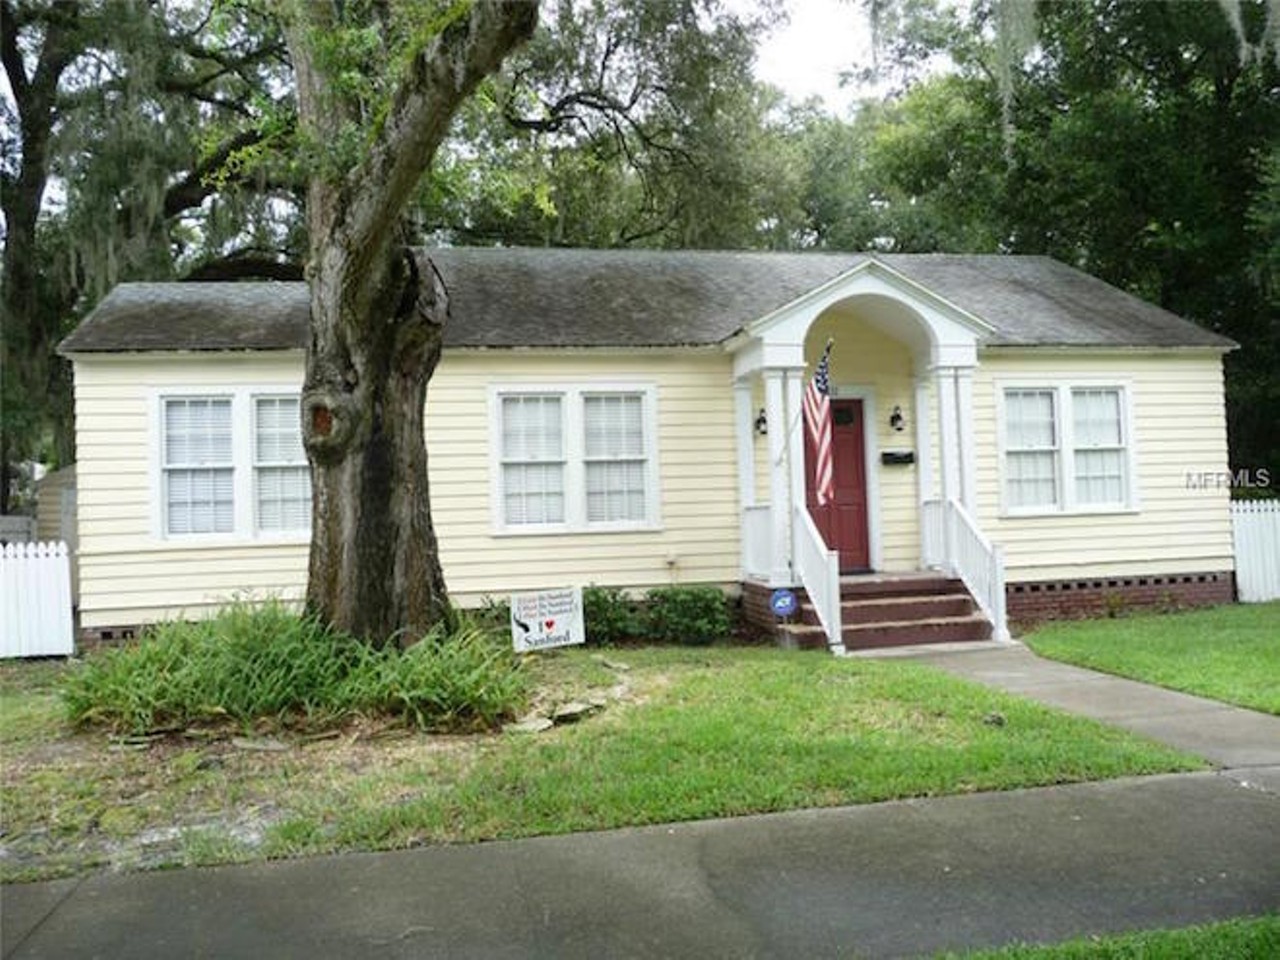 This adorable little house at 1111 S. Magnolia Ave. has 2 bedrooms, 1+ bath, and the price is $129,000.